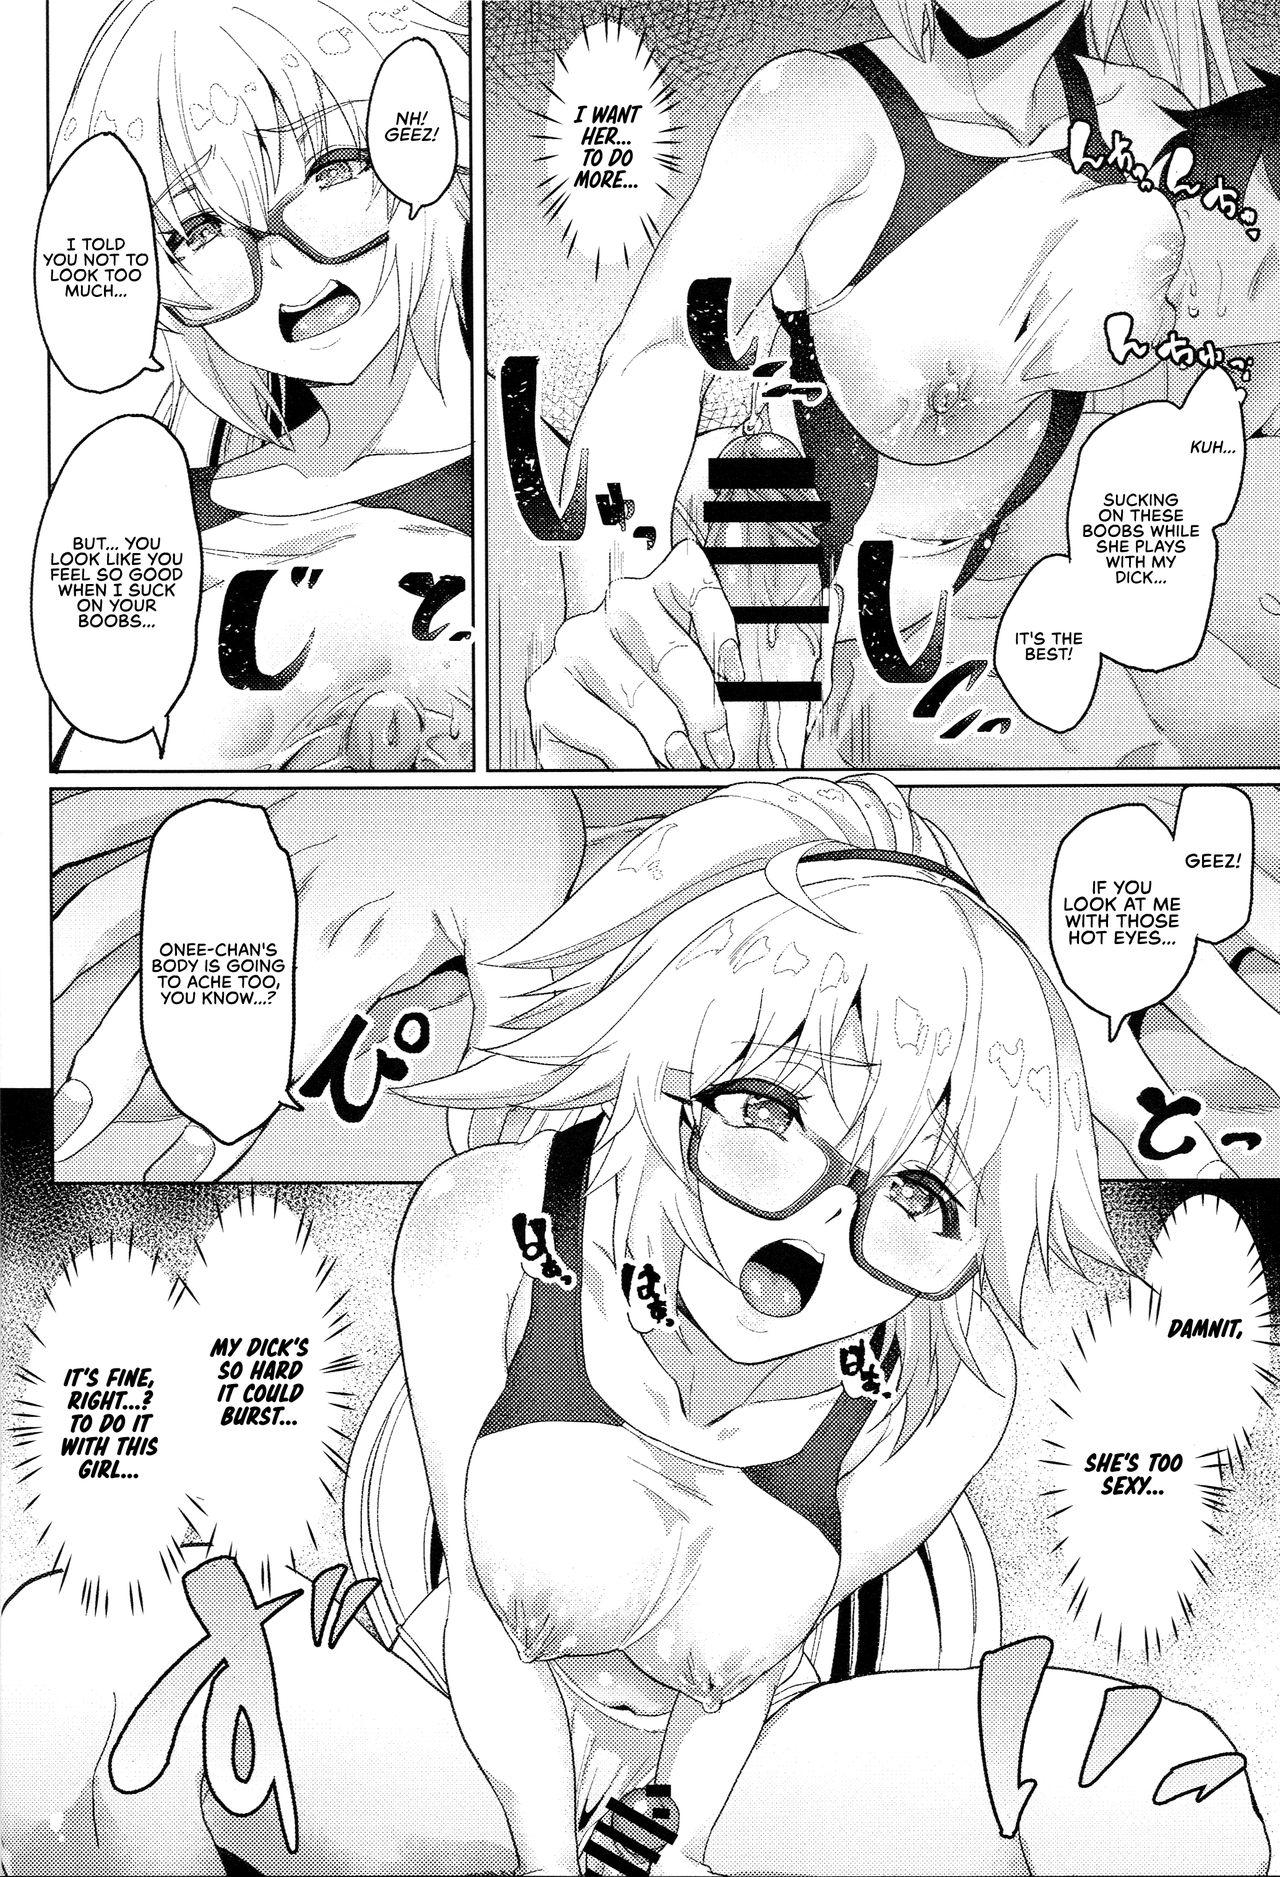 (C96) [Time-Leap (Aoiro Ichigou)] Even Knowing That It's a Trap, I (An NTR Victim) Can't Resist My Friend's Touch-Heavy Jeanne! (Fate/Grand Order) [English] [RedLantern] 13